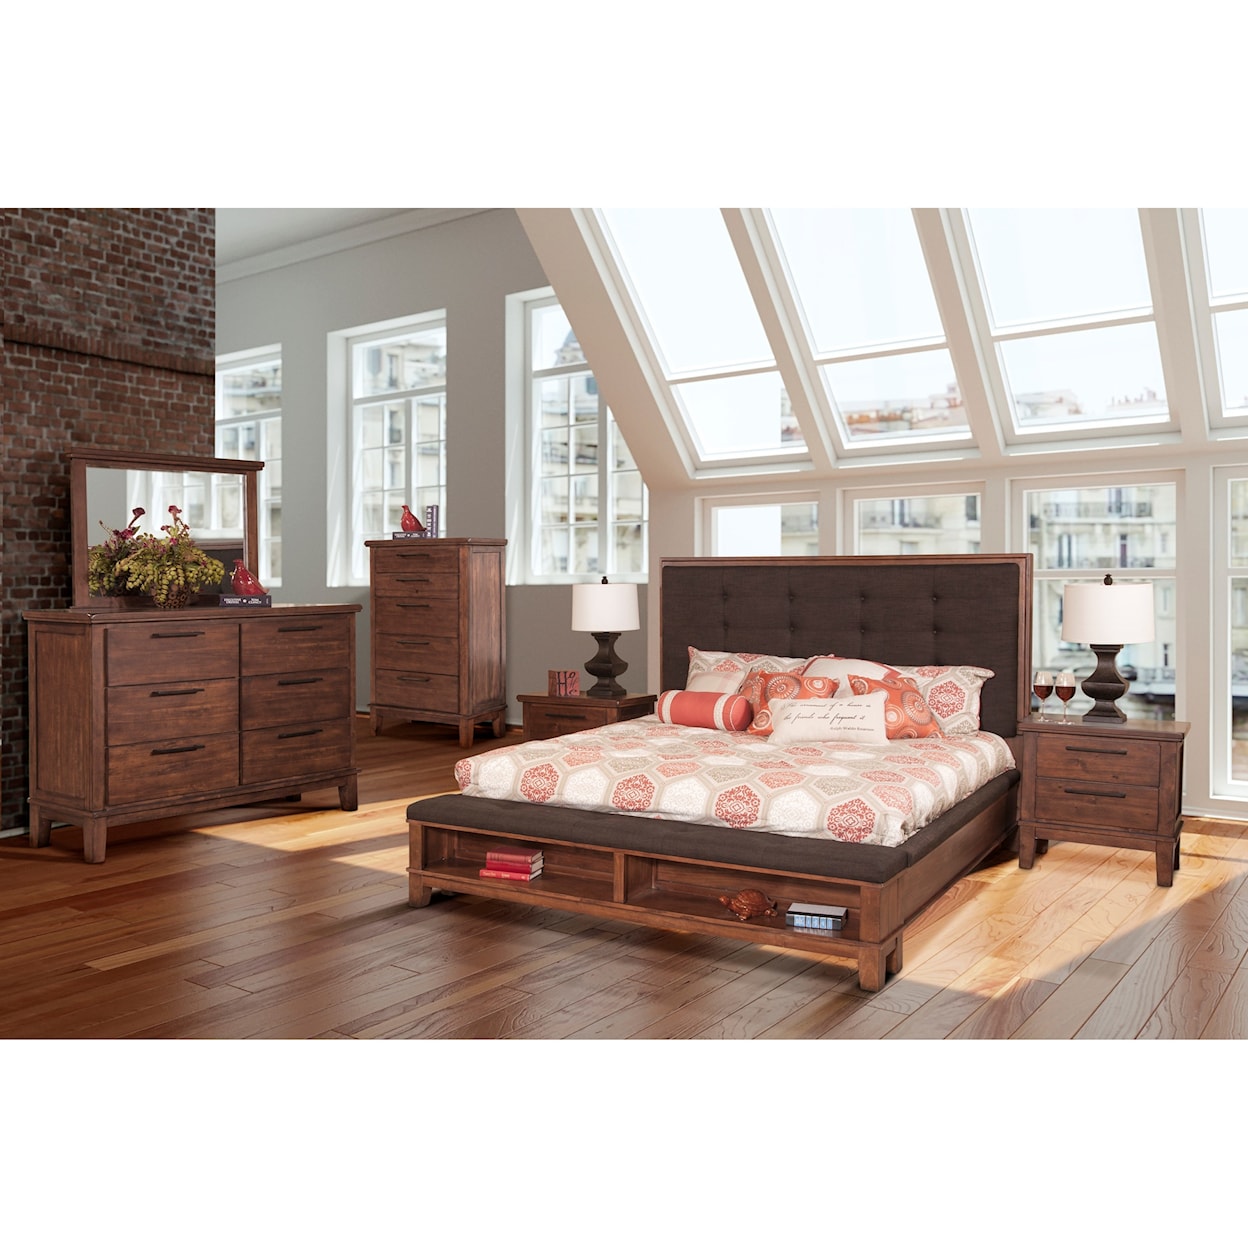 New Classic Furniture Cagney King Bedroom Group